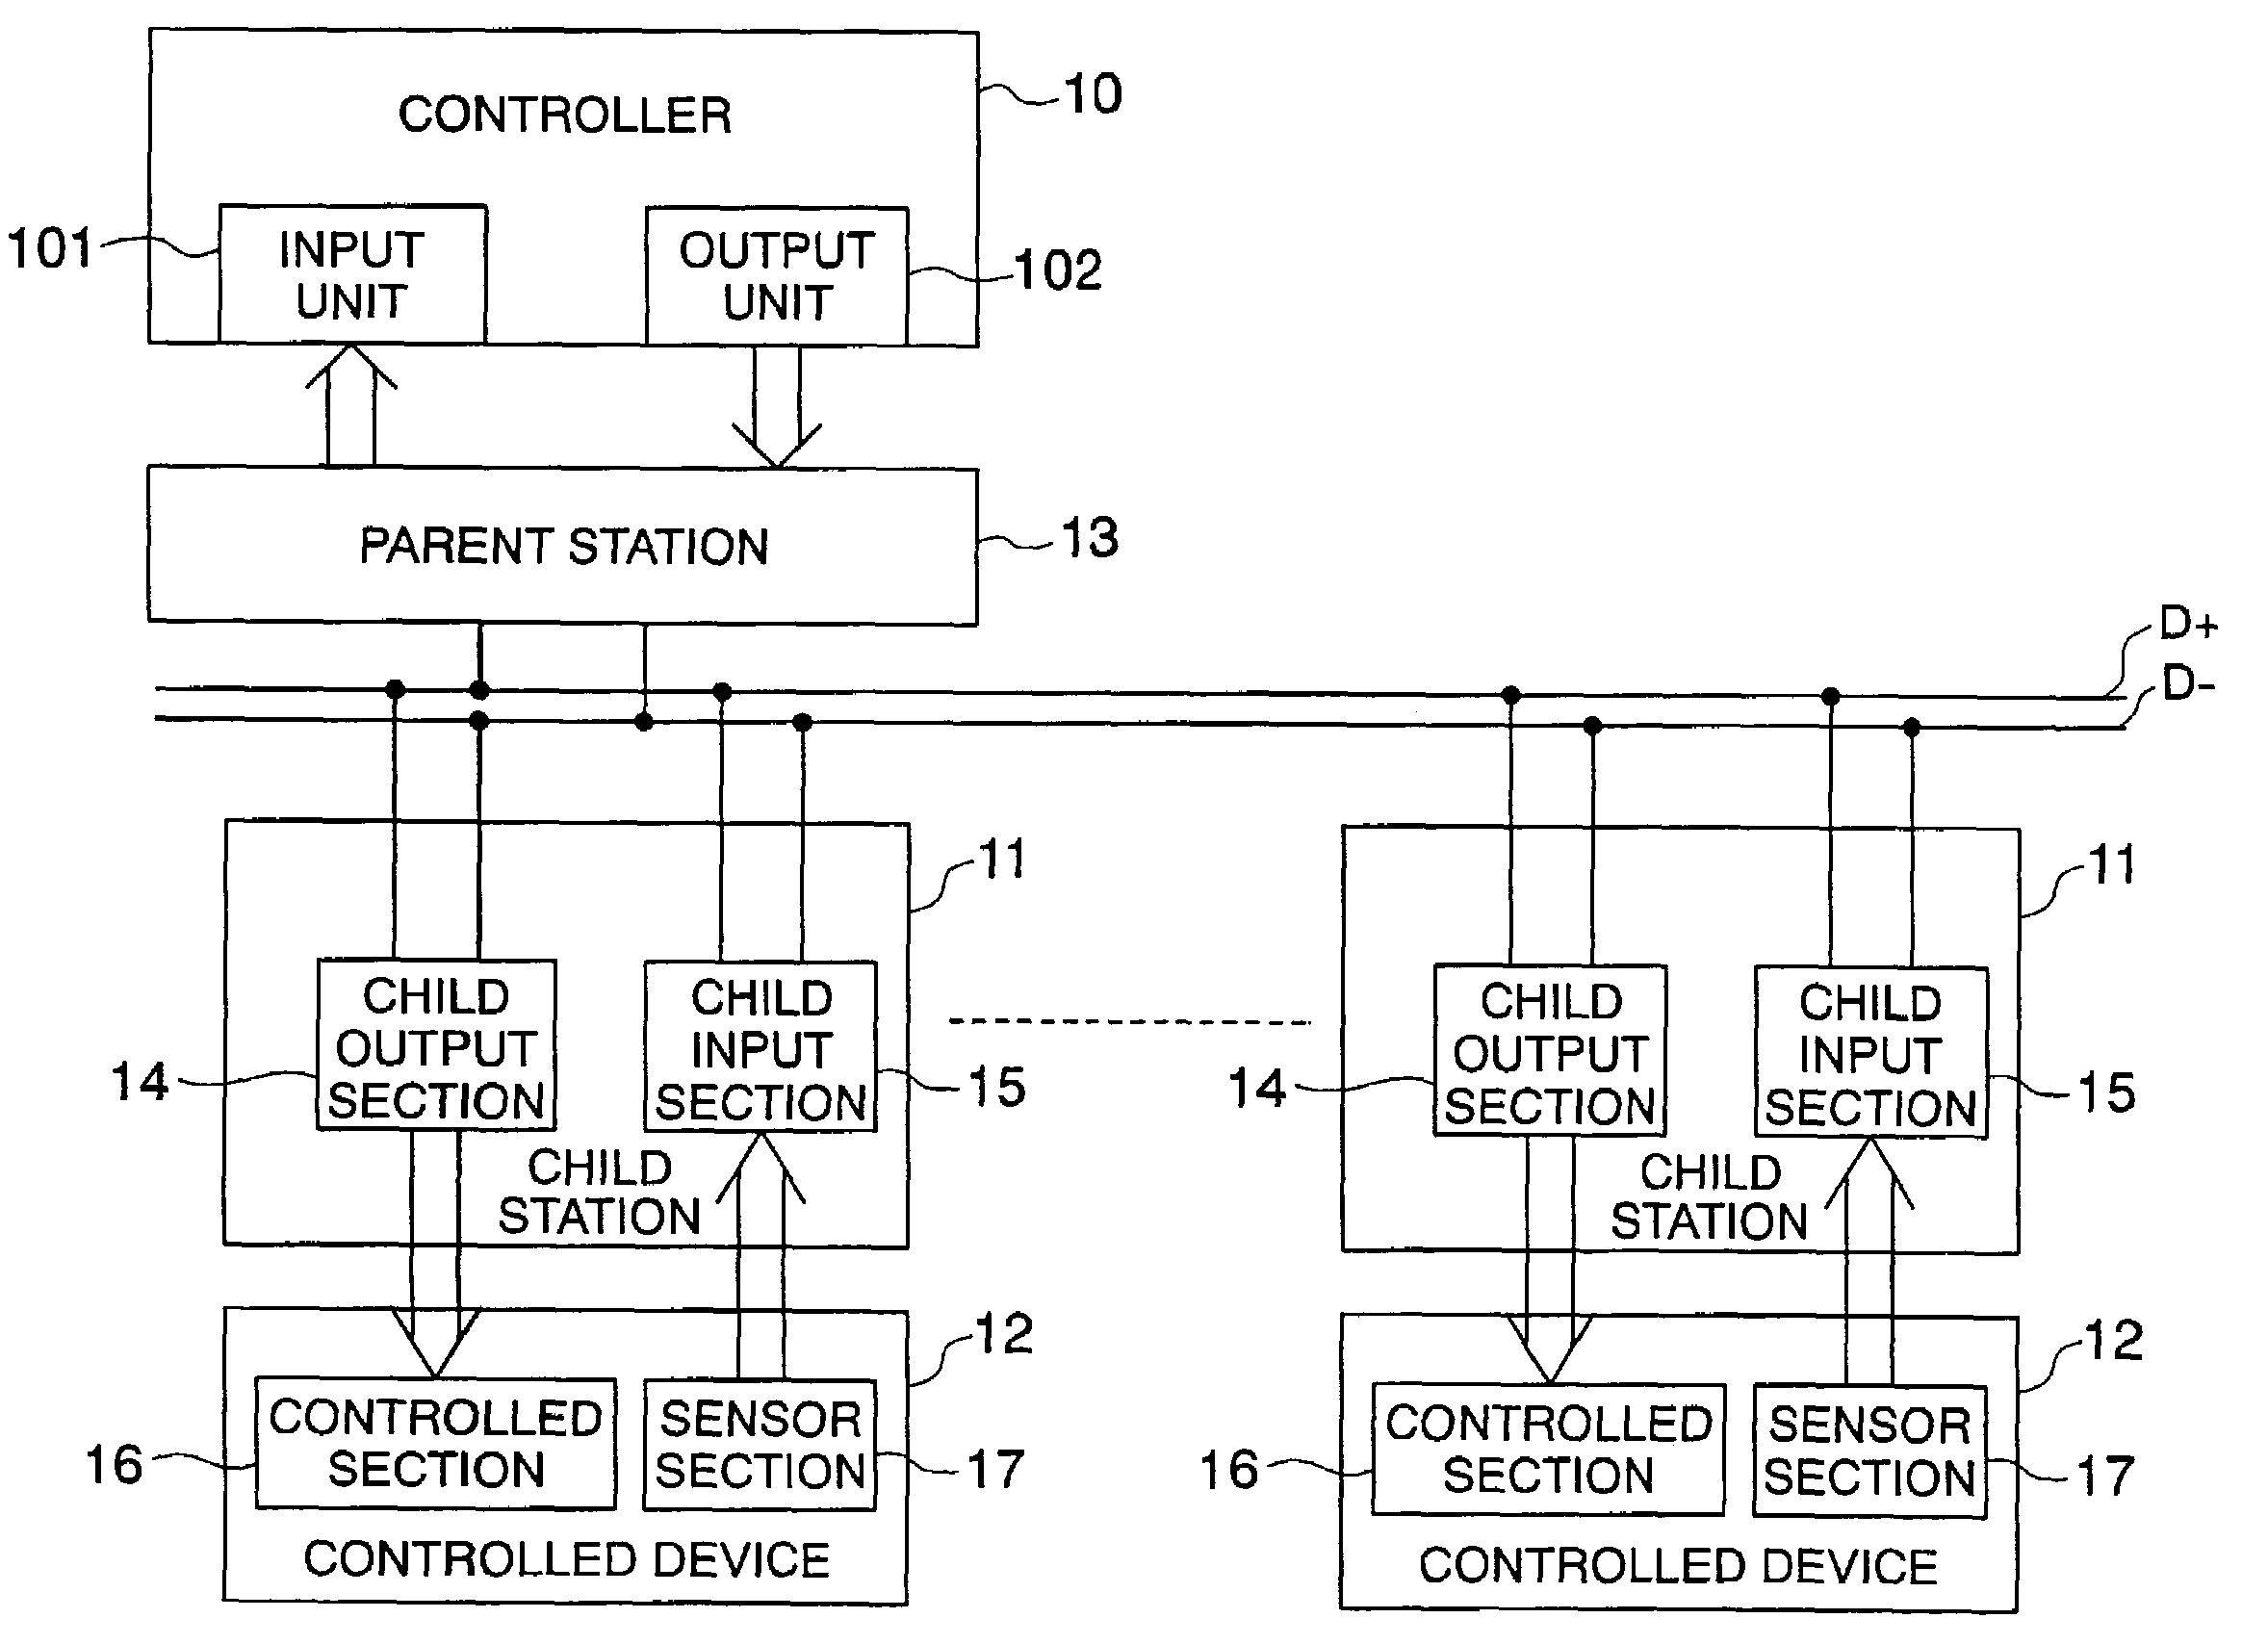 Control and supervisory signal transmission system for changing a duty factor of a control signal